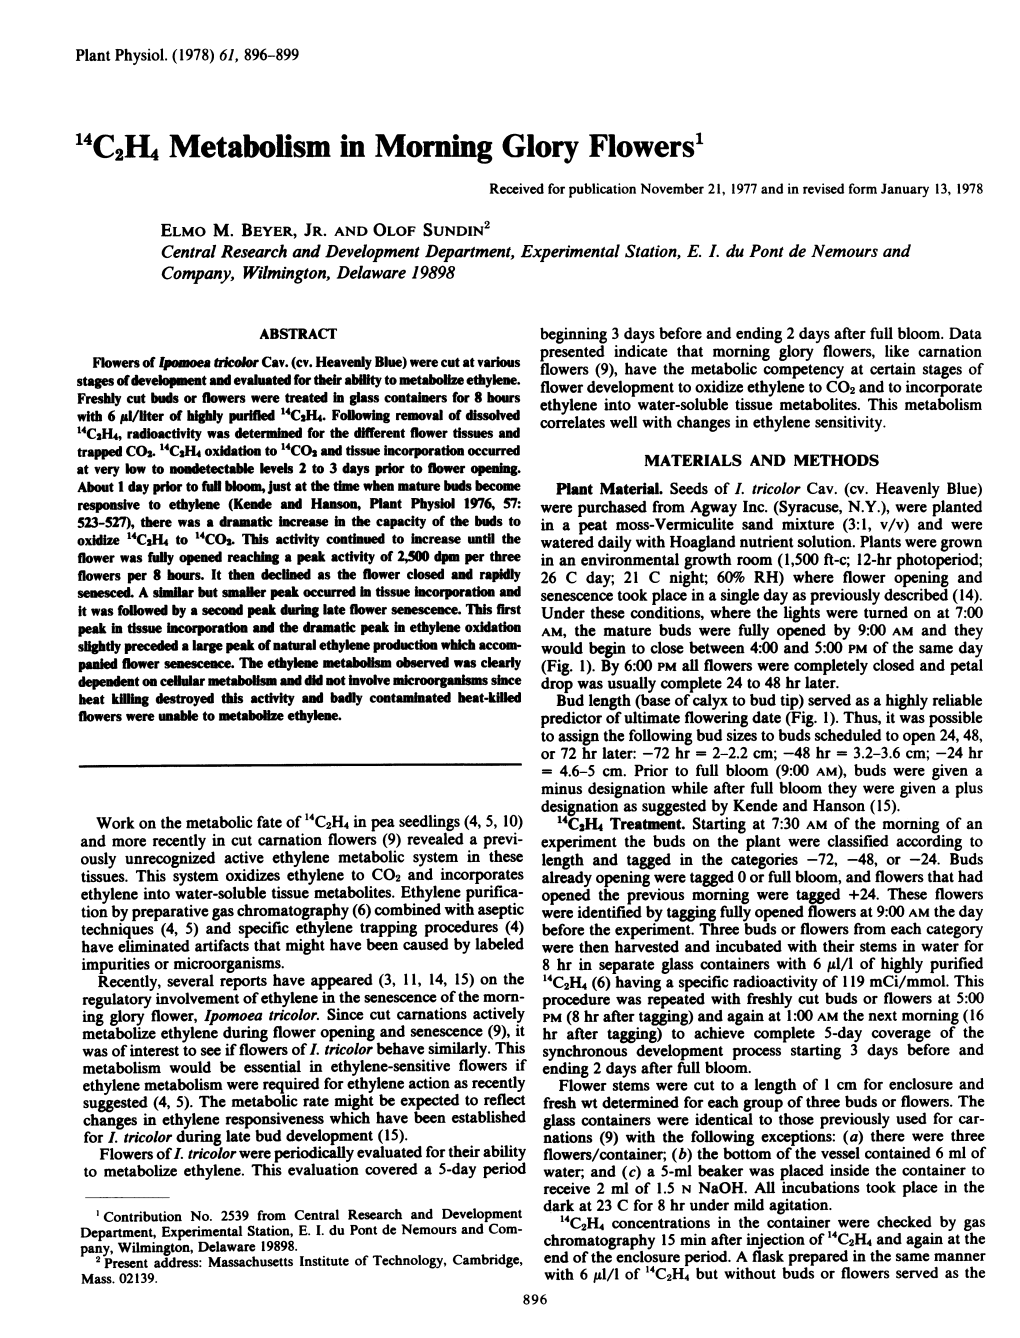 14C2H4 Metabolism in Morning Glory Flowers' Received for Publication November 21, 1977 and in Revised Form January 13, 1978